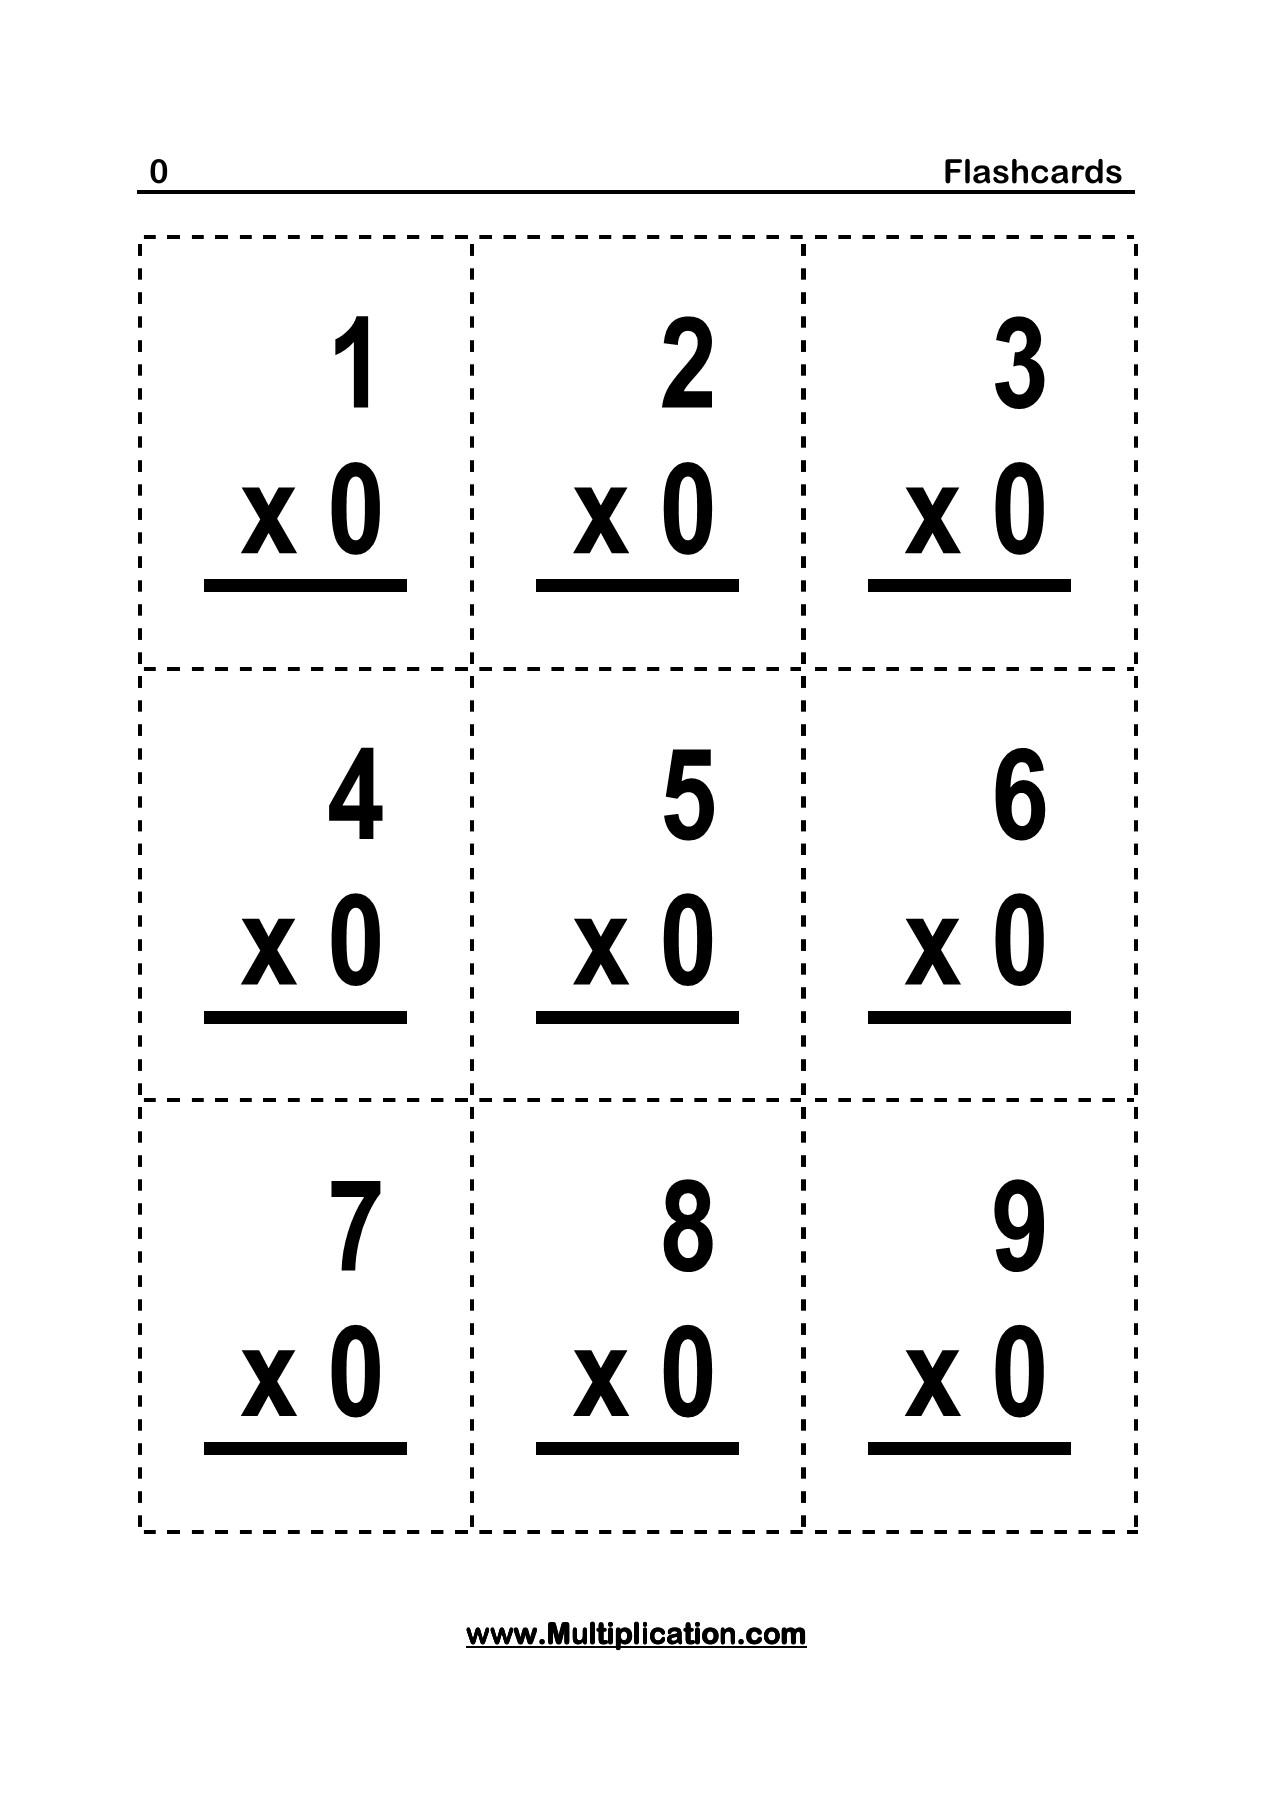 Flashcards - 0 - Multiplication Pages 1 - 26 - Text